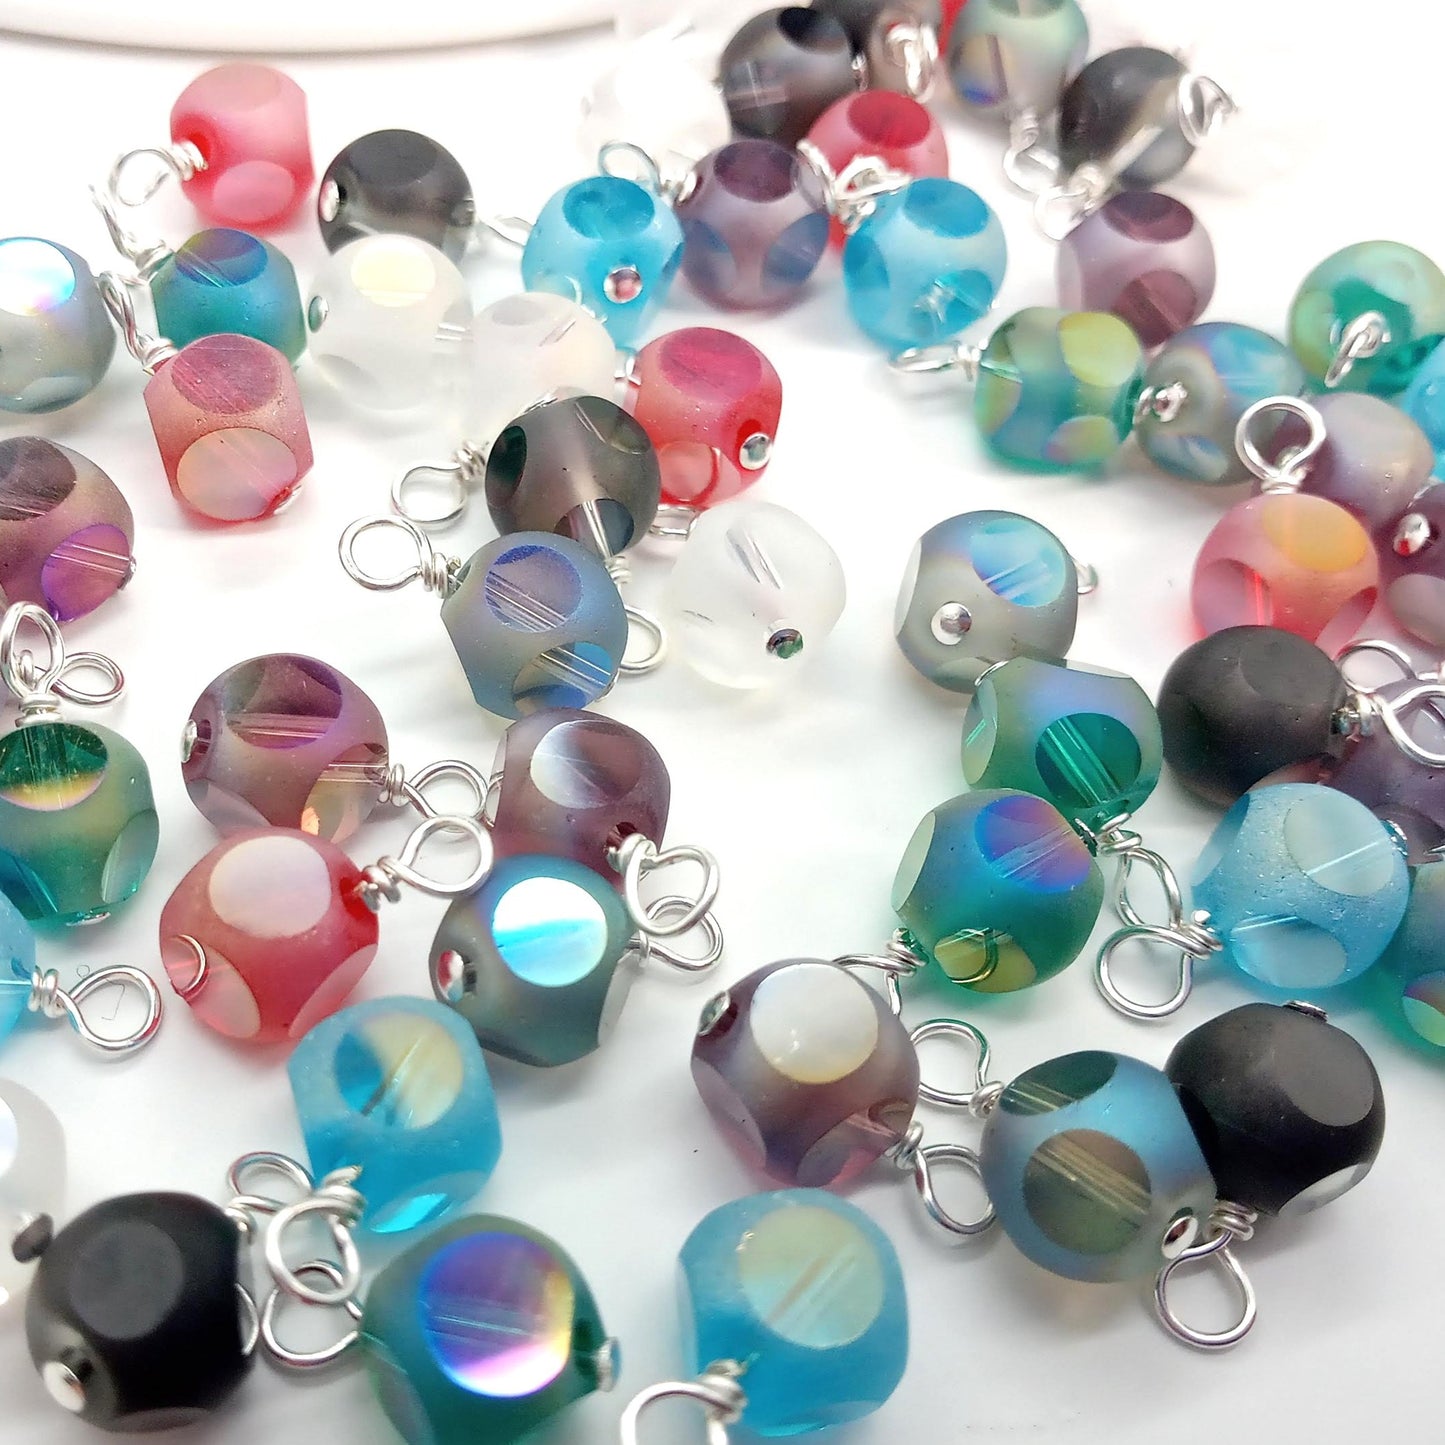 Frosted Bead Dangles - Pretty Glass Bead Charms - Adorabilities Charms & Trinkets